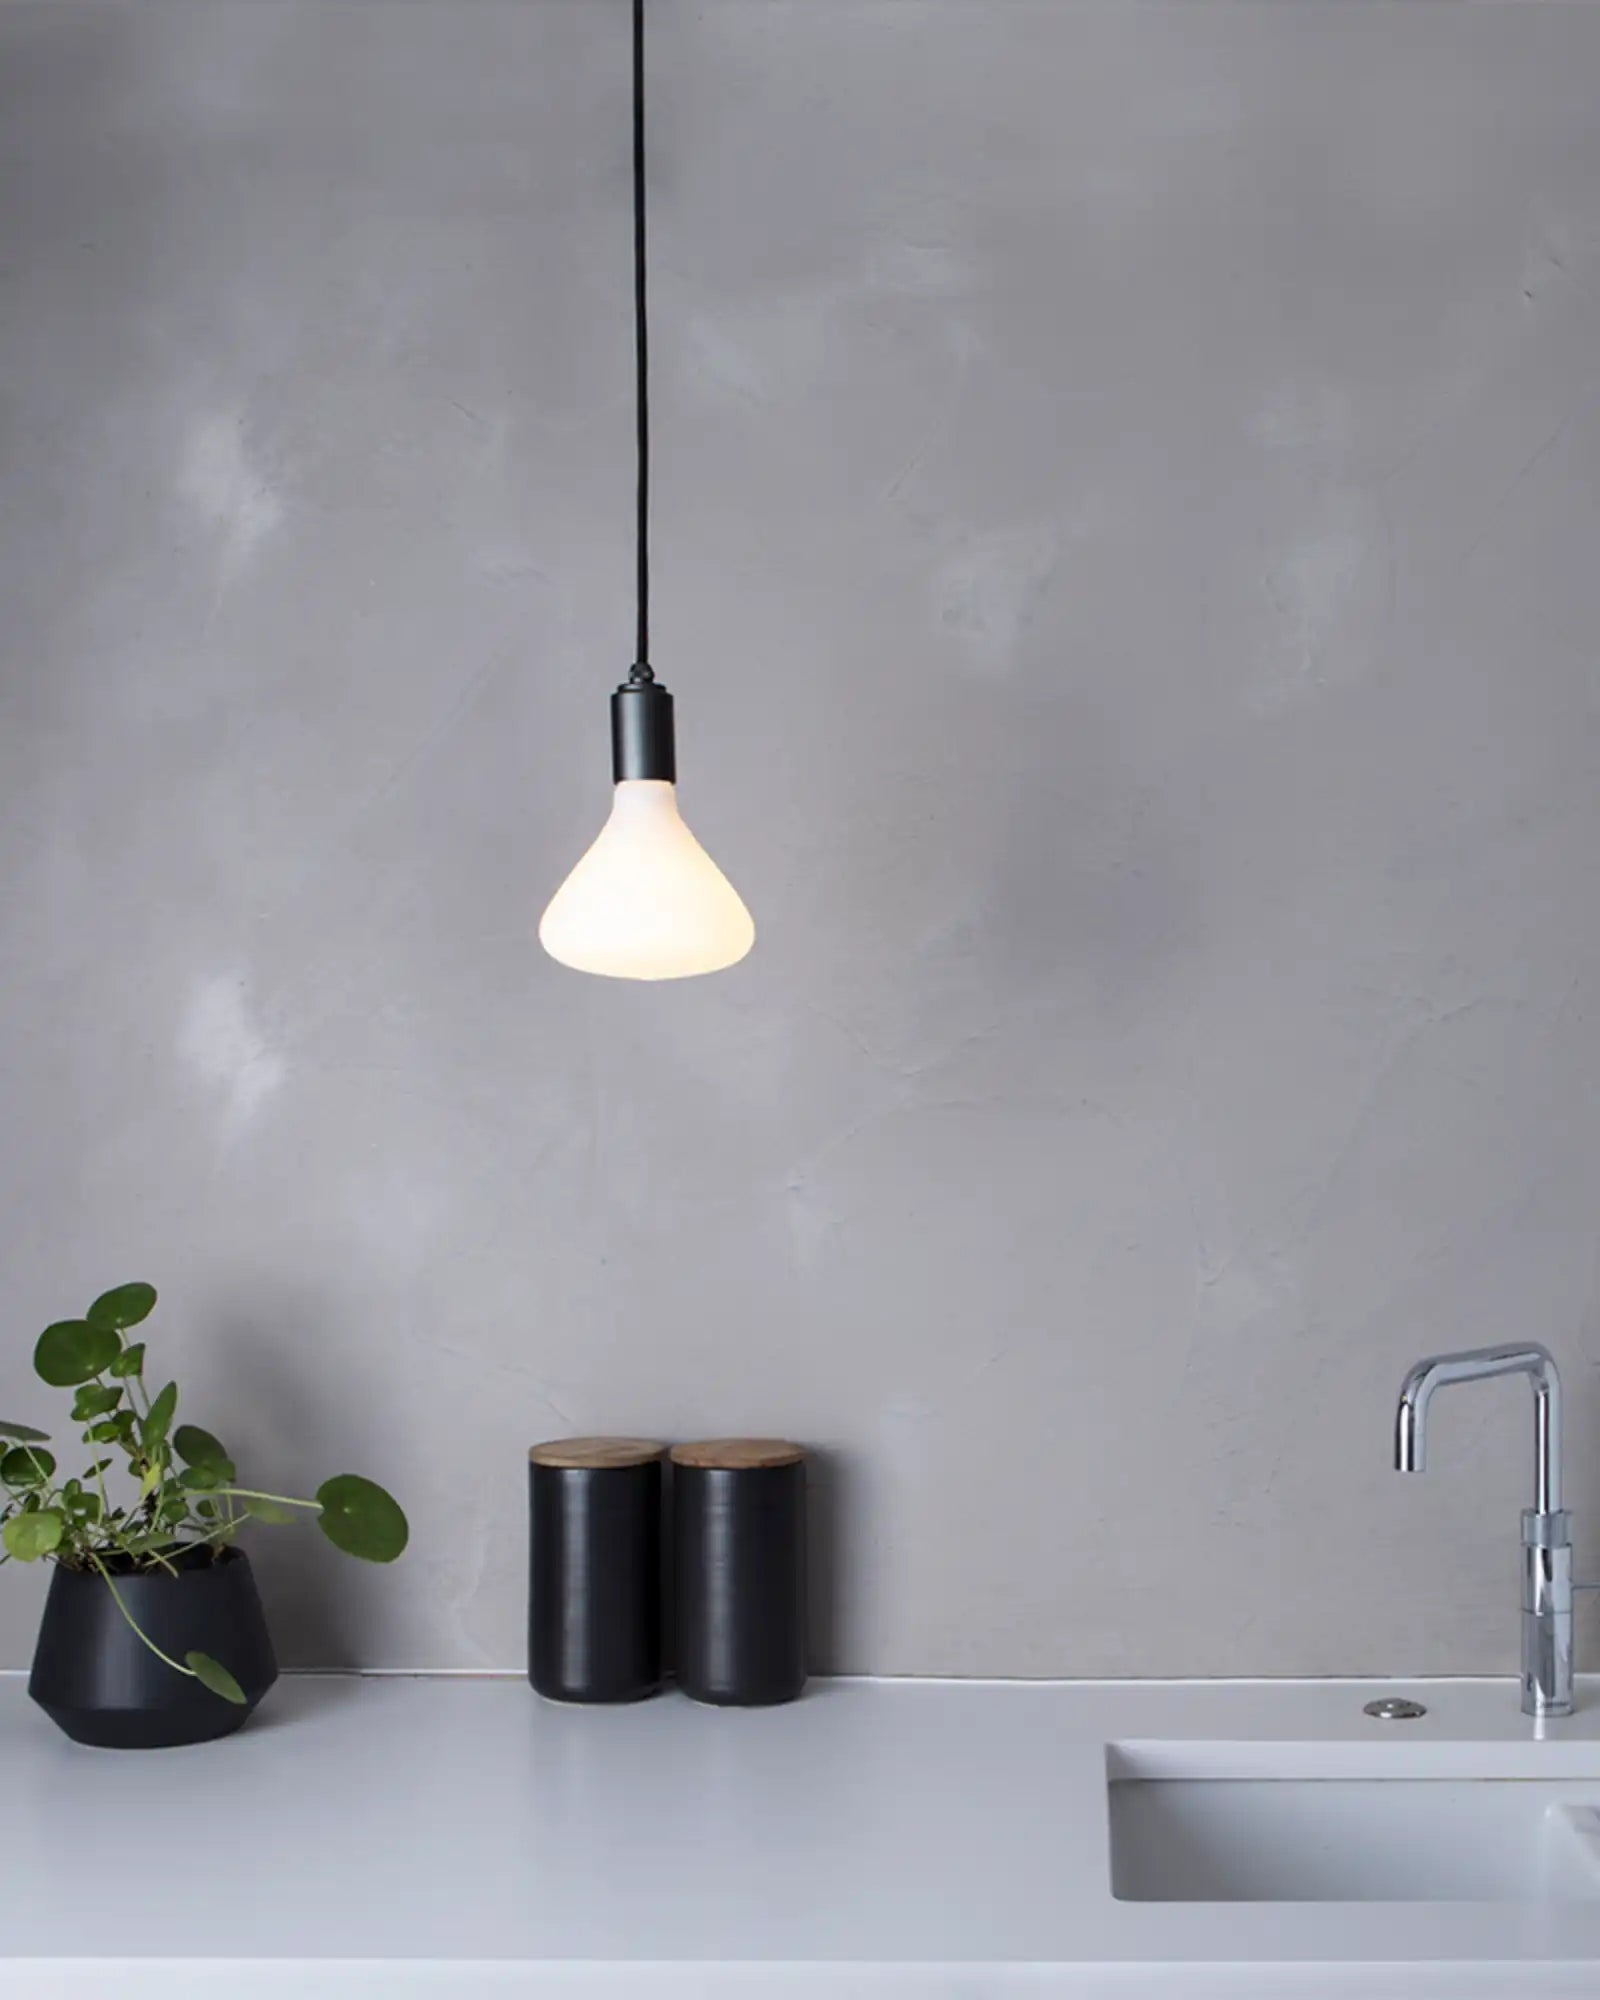 Noma Pendant Light by Tala featured within a minimalist kitchen | Nook Collections